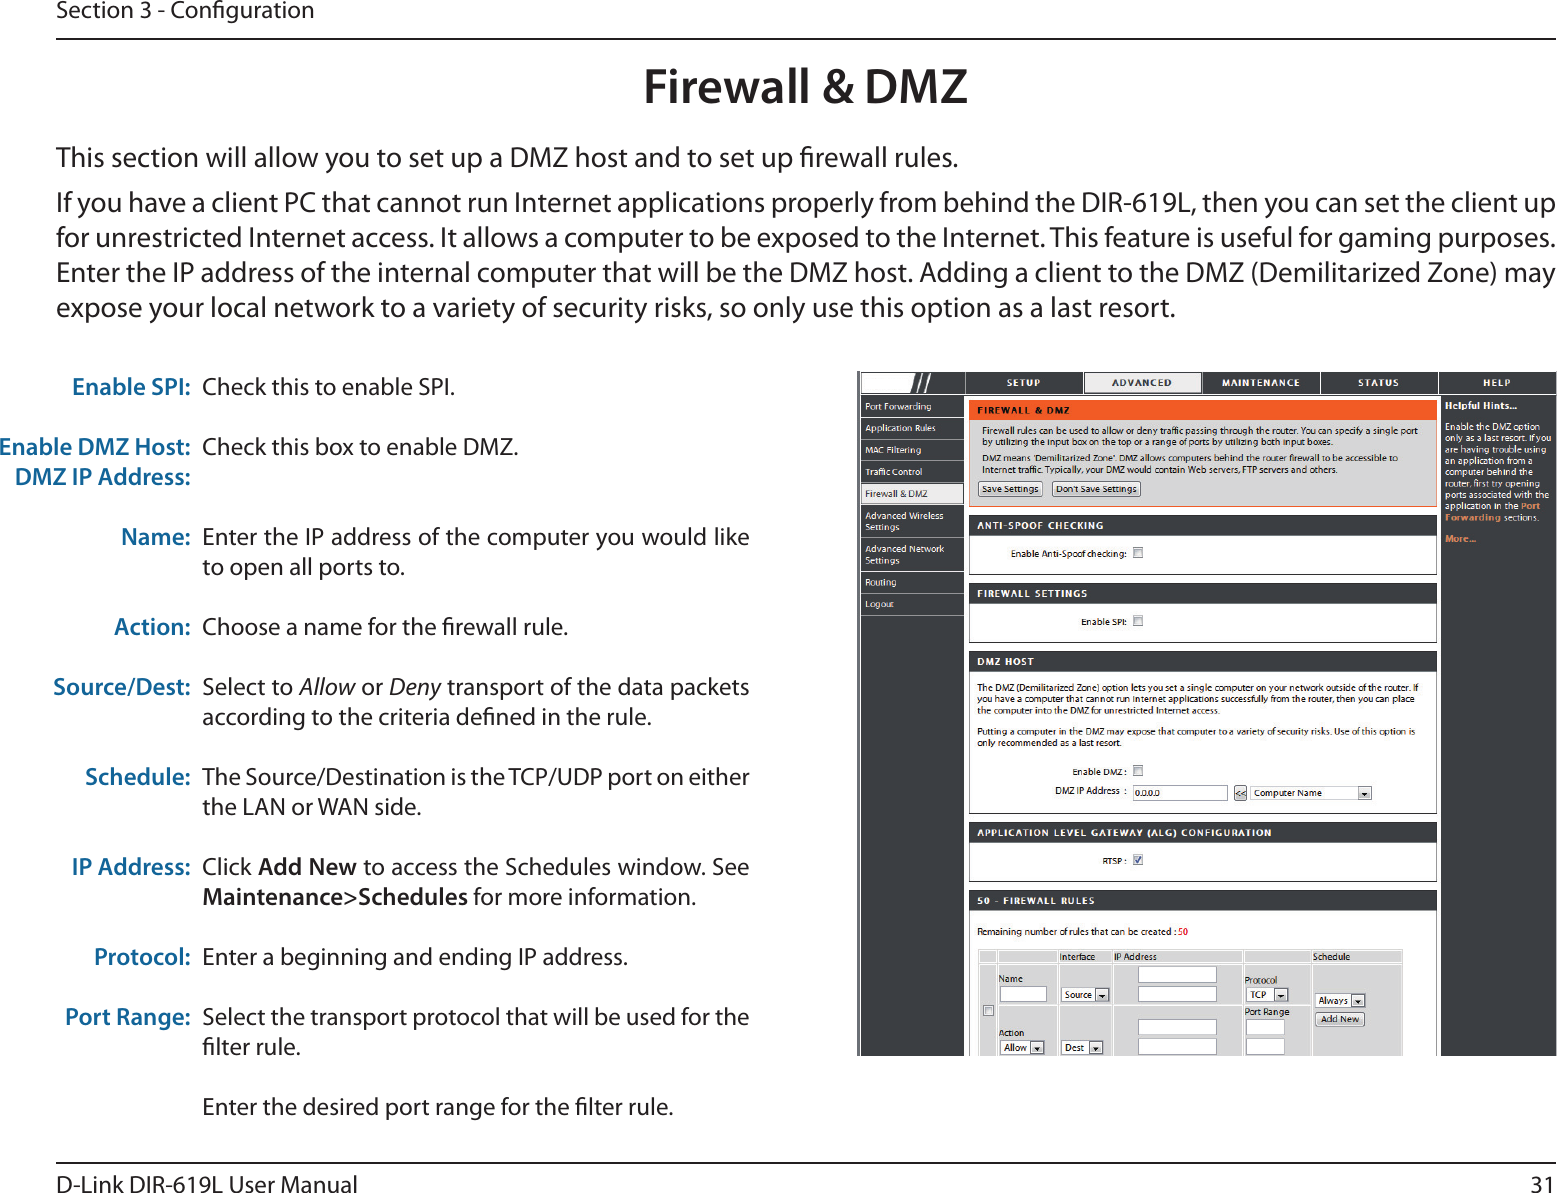 31D-Link DIR-619L User ManualSection 3 - CongurationFirewall &amp; DMZThis section will allow you to set up a DMZ host and to set up rewall rules.If you have a client PC that cannot run Internet applications properly from behind the DIR-619L, then you can set the client up for unrestricted Internet access. It allows a computer to be exposed to the Internet. This feature is useful for gaming purposes. Enter the IP address of the internal computer that will be the DMZ host. Adding a client to the DMZ (Demilitarized Zone) may expose your local network to a variety of security risks, so only use this option as a last resort.Check this to enable SPI.Check this box to enable DMZ.Enter the IP address of the computer you would like to open all ports to.Choose a name for the rewall rule.Select to Allow or Deny transport of the data packets according to the criteria dened in the rule. The Source/Destination is the TCP/UDP port on either the LAN or WAN side.Click Add New to access the Schedules window. See Maintenance&gt;Schedules for more information.Enter a beginning and ending IP address.Select the transport protocol that will be used for the lter rule.Enter the desired port range for the lter rule.Enable DMZ Host:DMZ IP Address:Name:Action:Source/Dest:Schedule:IP Address:Protocol:Port Range: Enable SPI:    DIR-619L